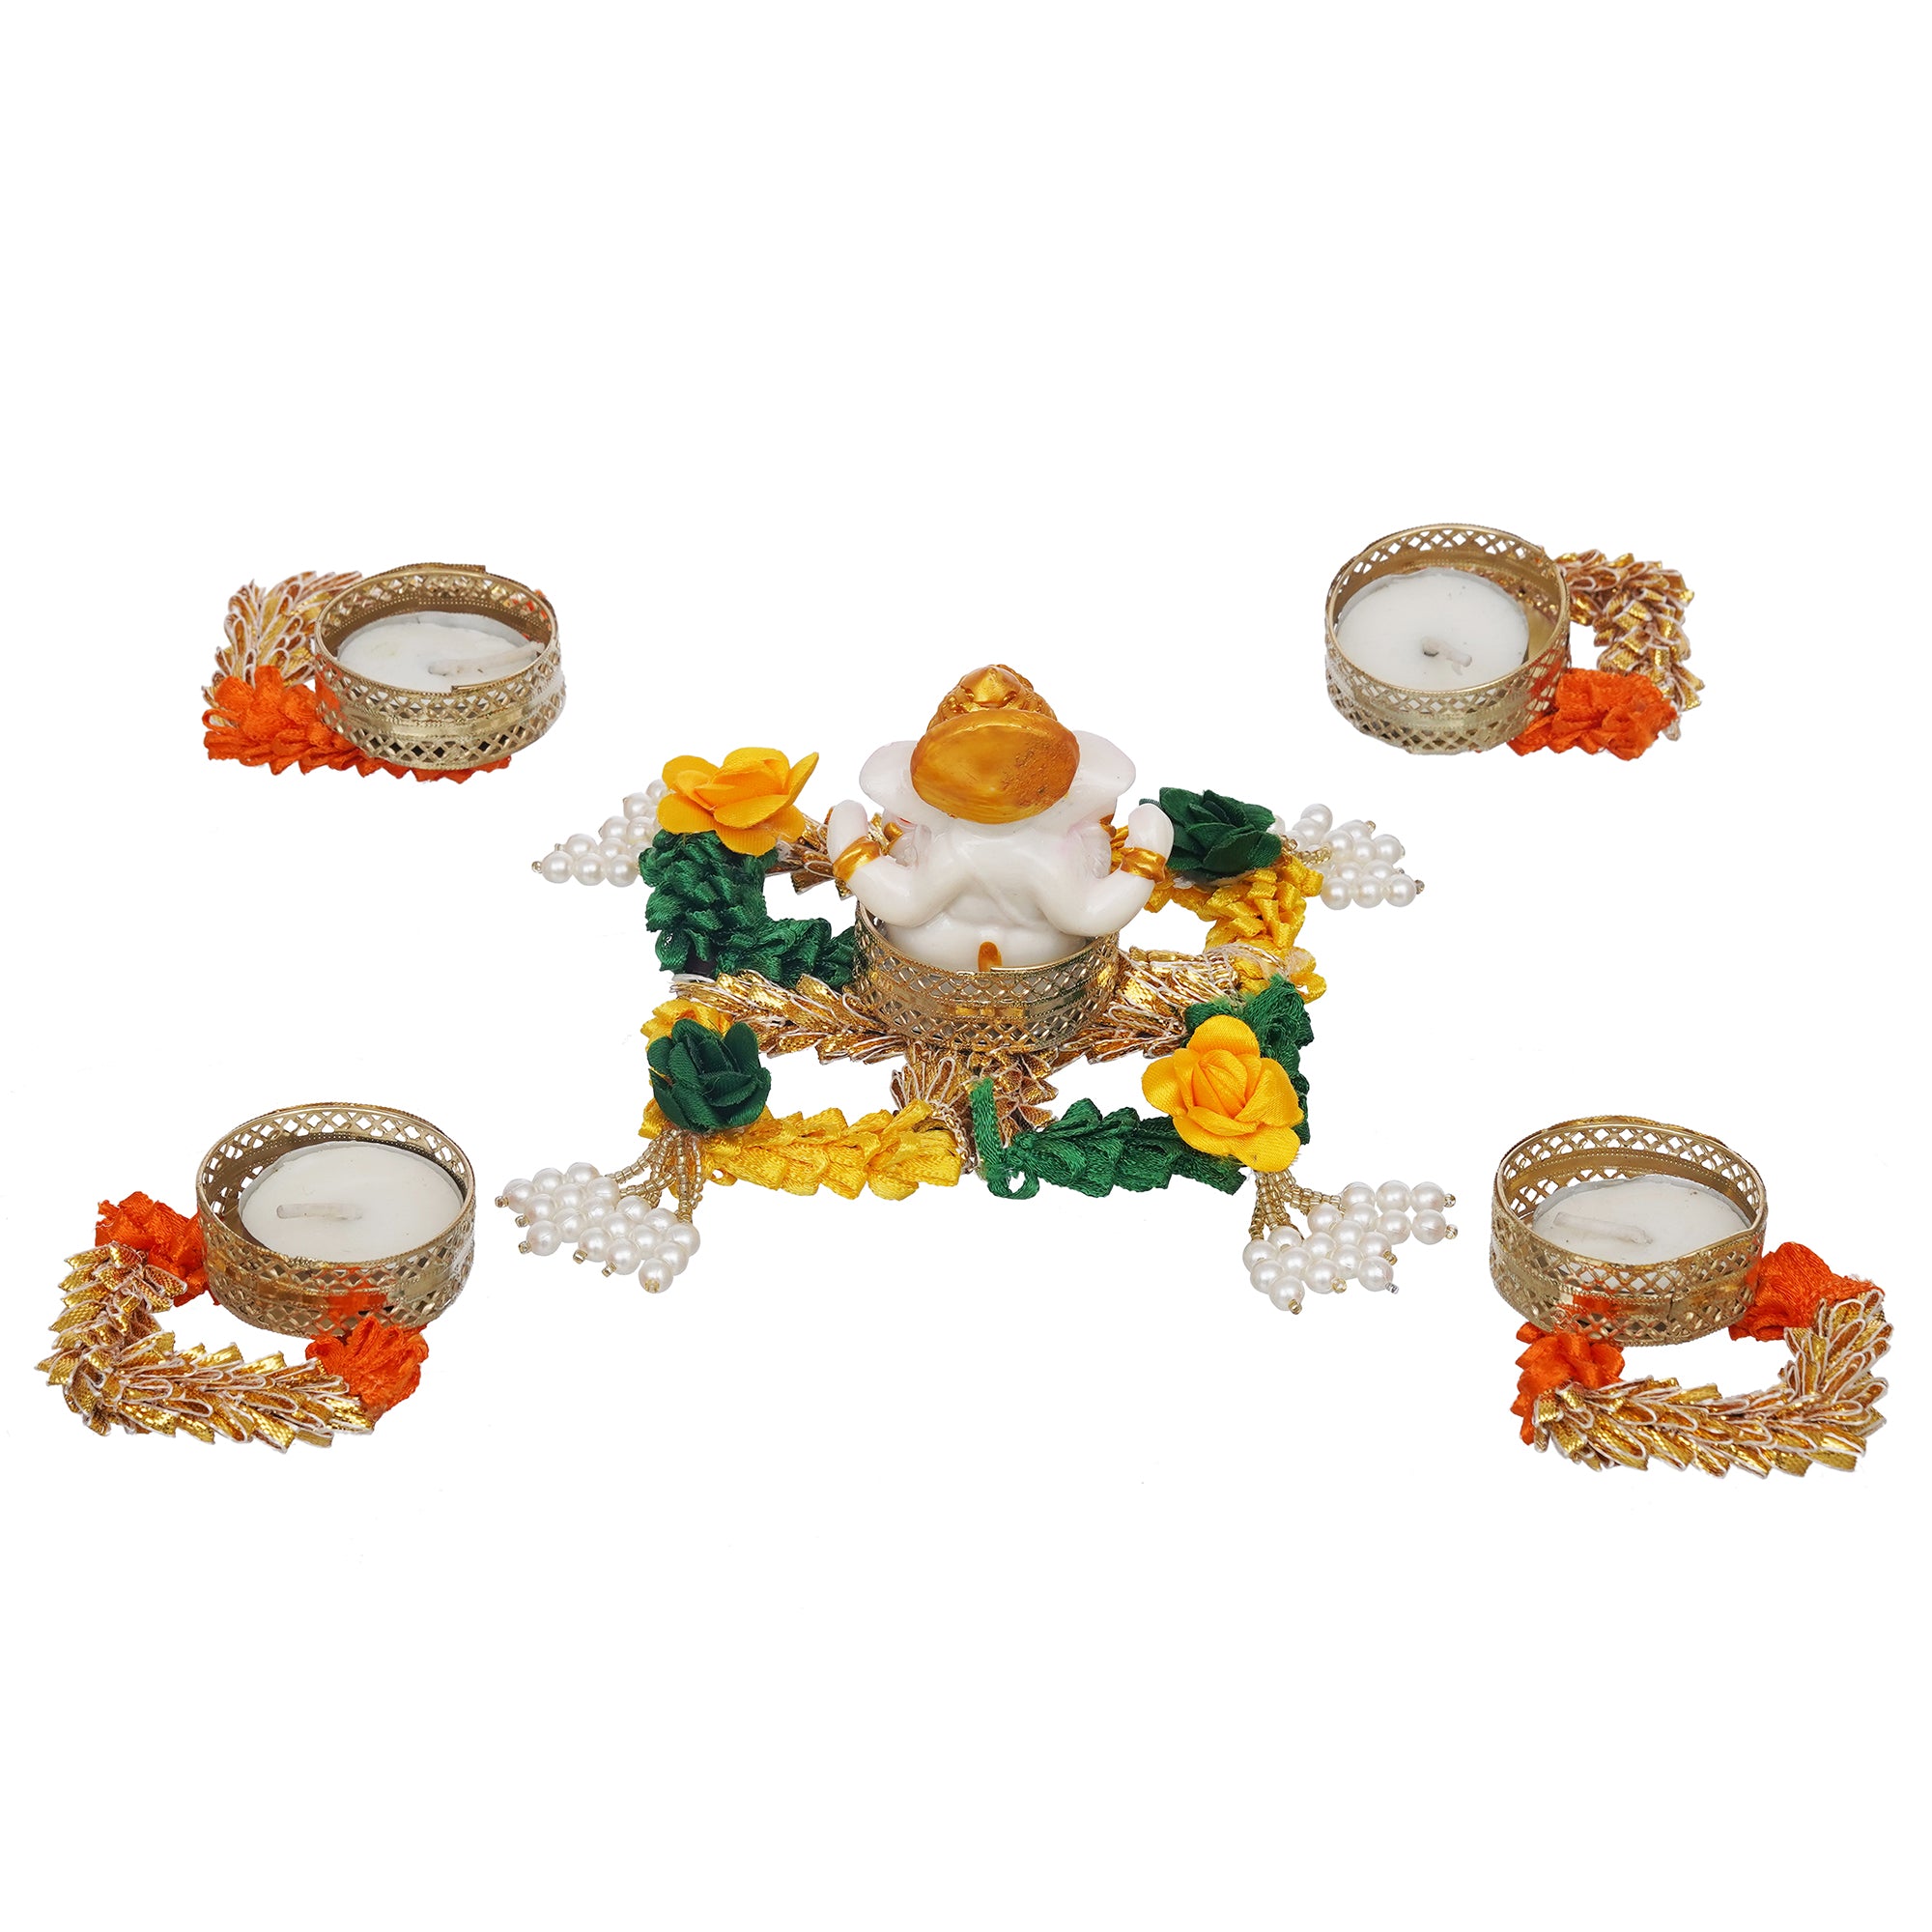 eCraftIndia Lord Ganesha Idol on Floral and Beads Embellished Handcrafted Plate with 4 Decorative Tea Light Candle Holders 8